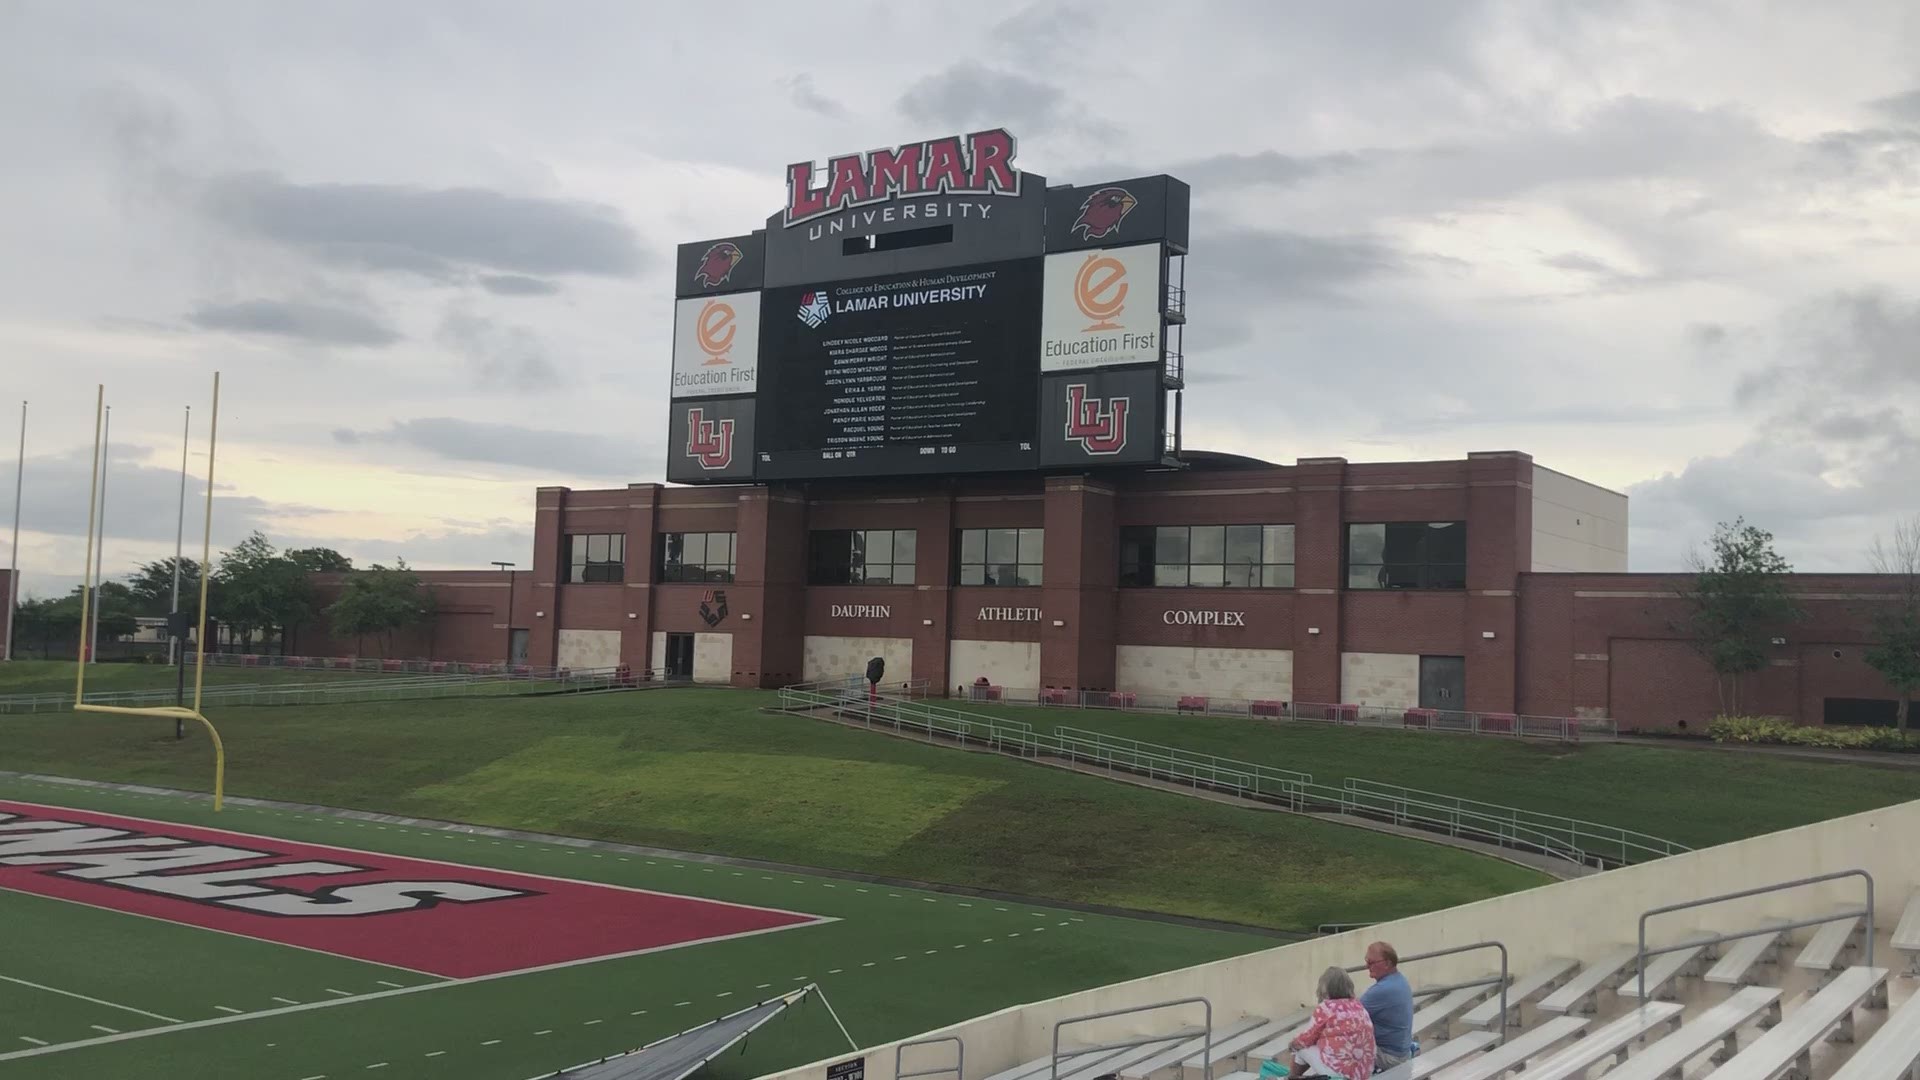 The university is displaying a slideshow for the class of 2020 on their scoreboard.